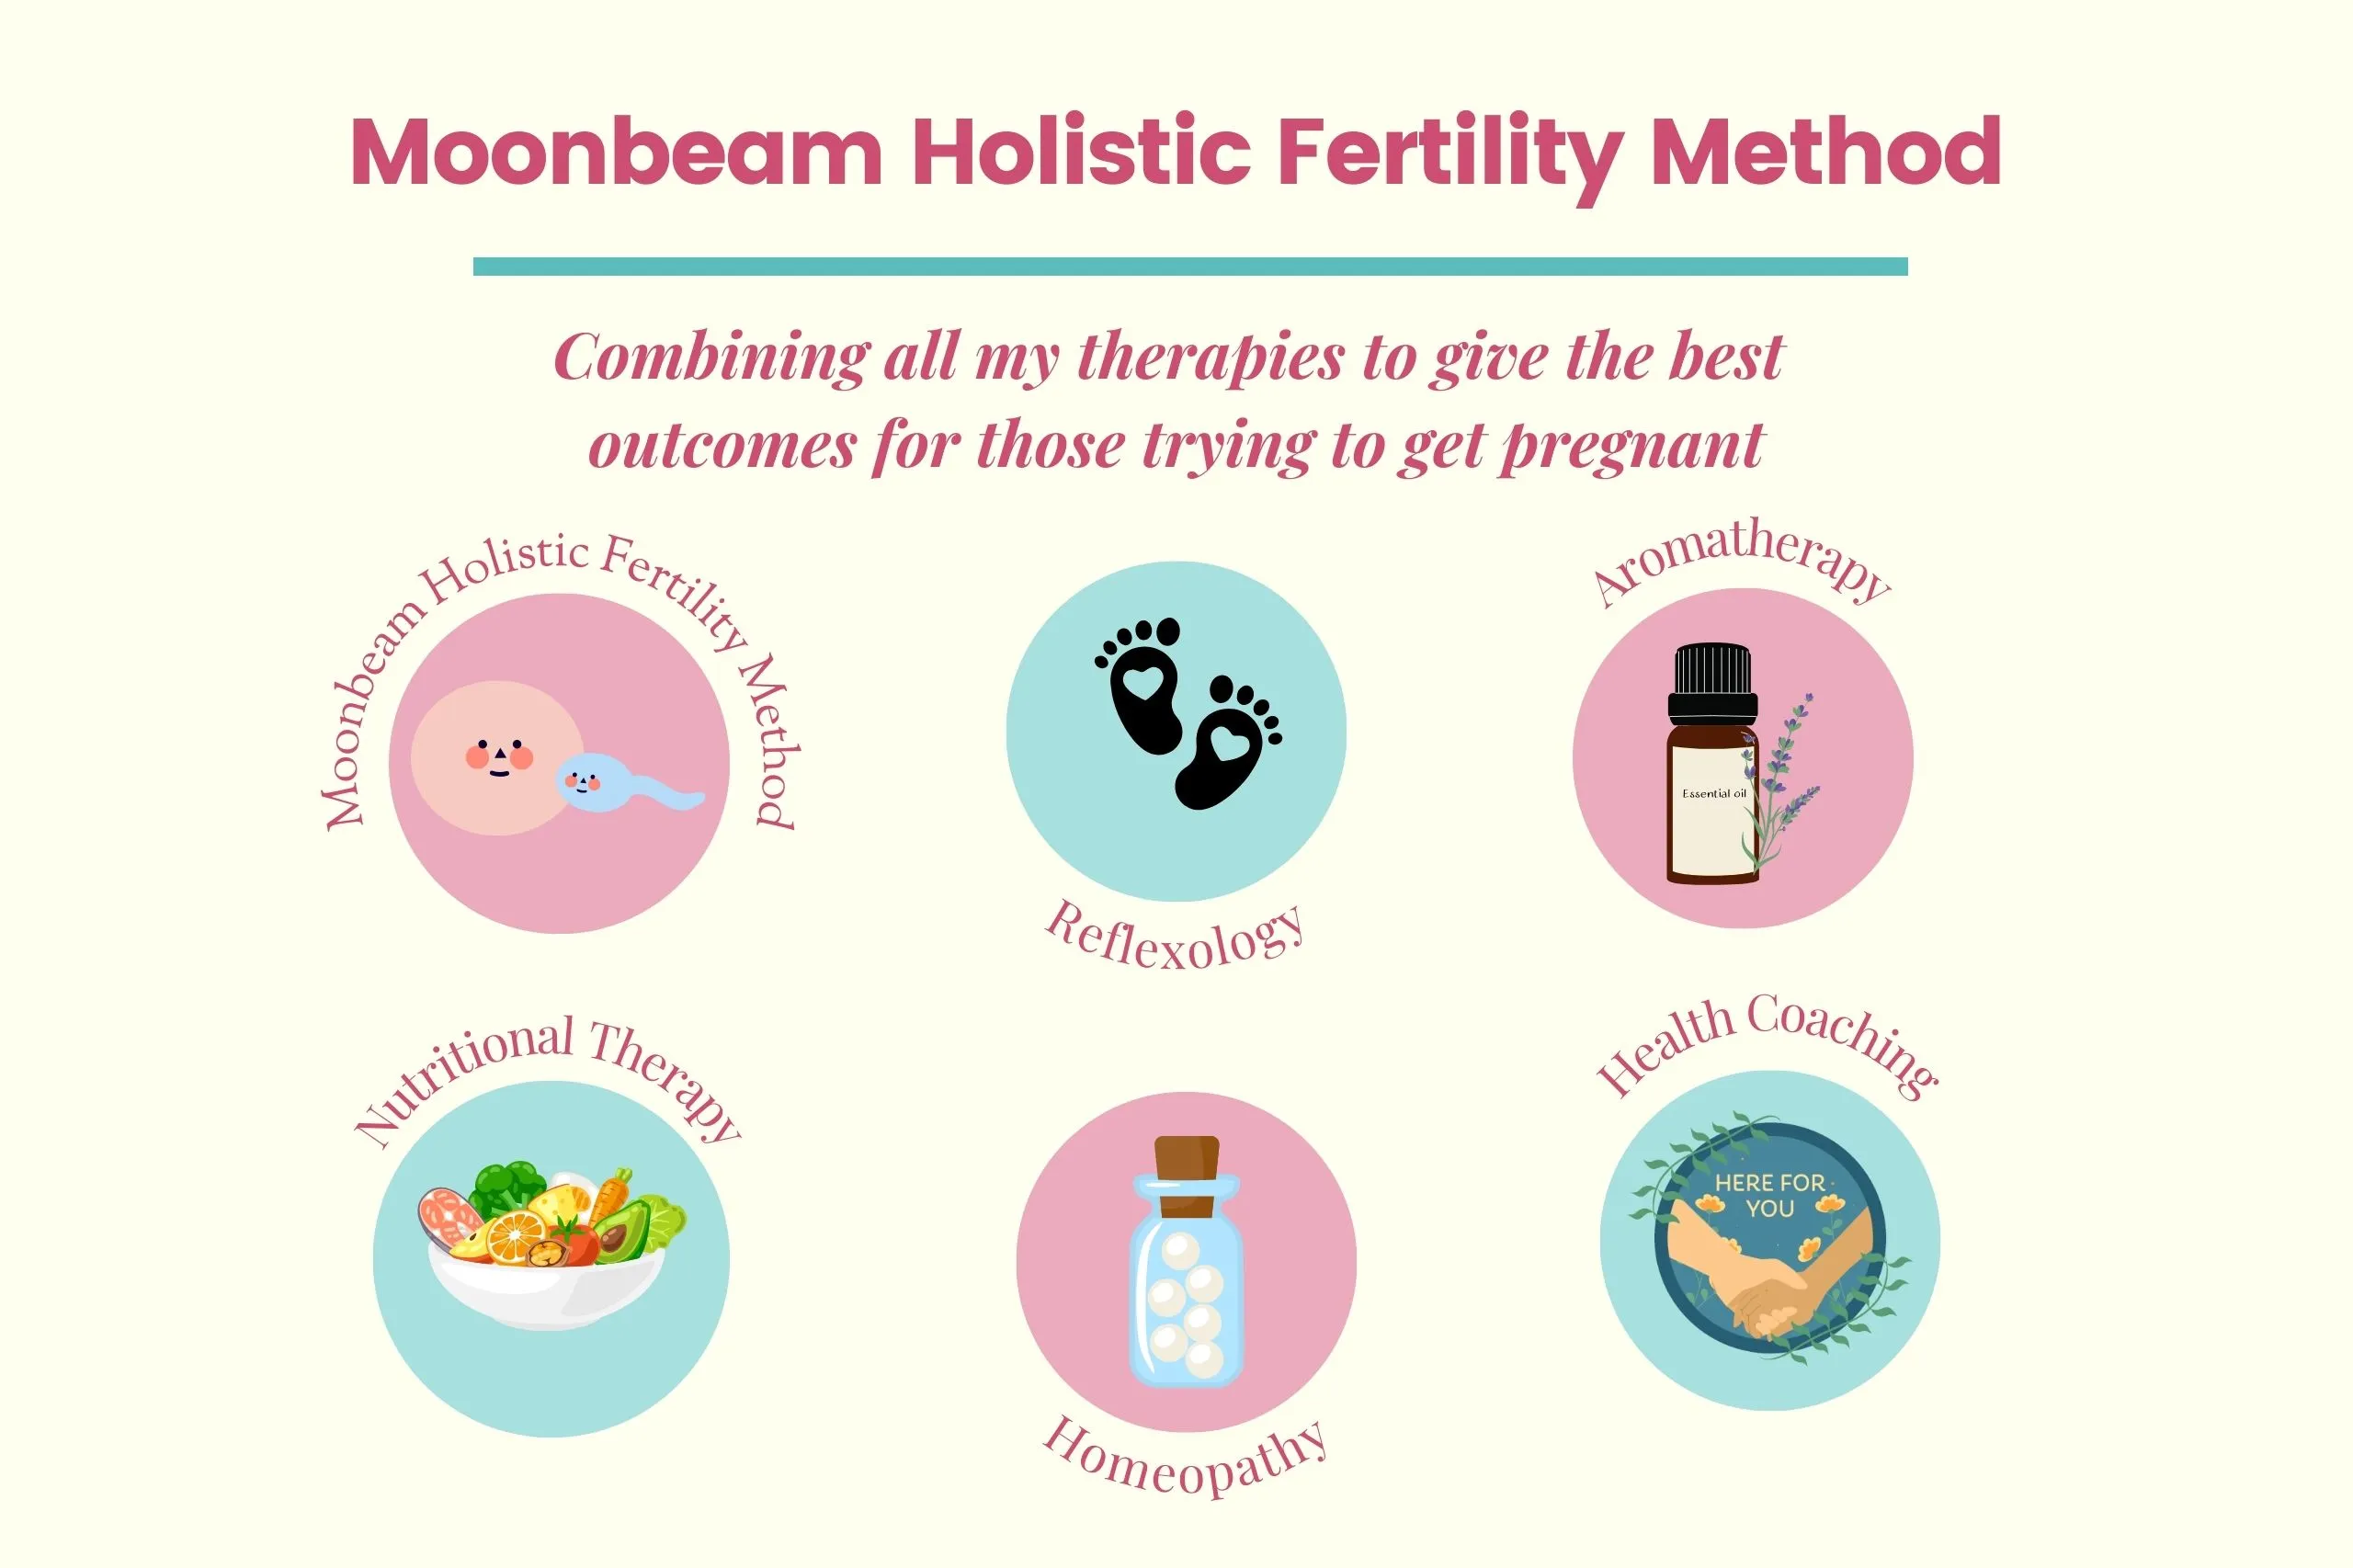 Moonbeam Holistic Fertility Method component parts - pictures of feet for reflexology, bottle of essential oil for aromatherapy, bowel of fruit and vegetables for nutritional therapy, bottle of pills for homeopathy, holding hands for health coaching. All the methods are either in a pink or blue circle on an ivory background